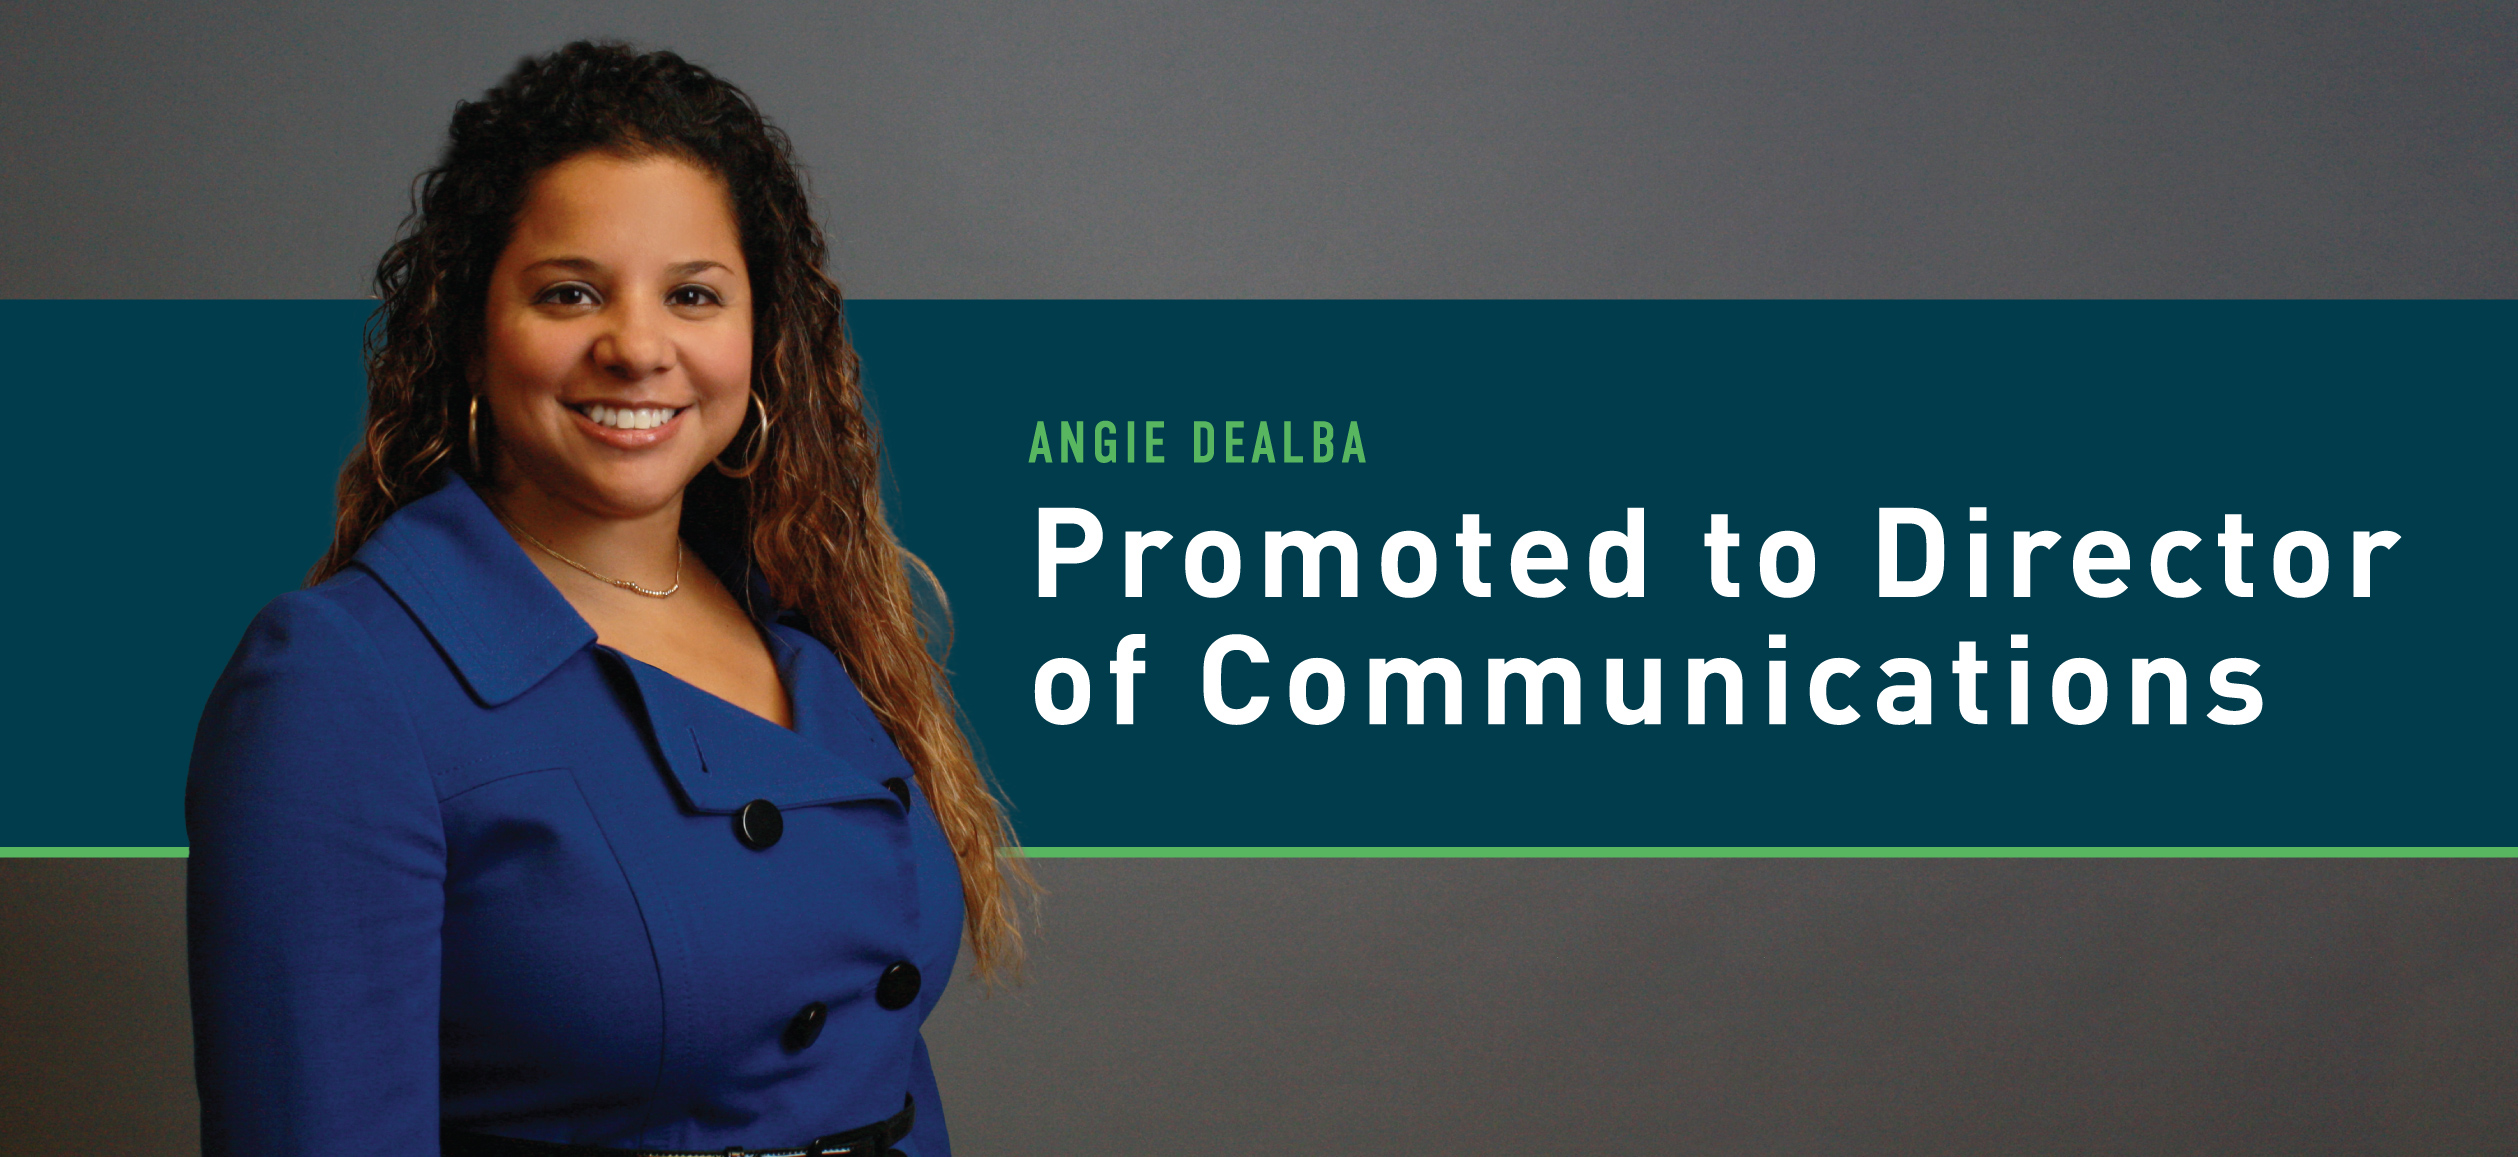 Angie DeAlba Promoted to Director of Communications